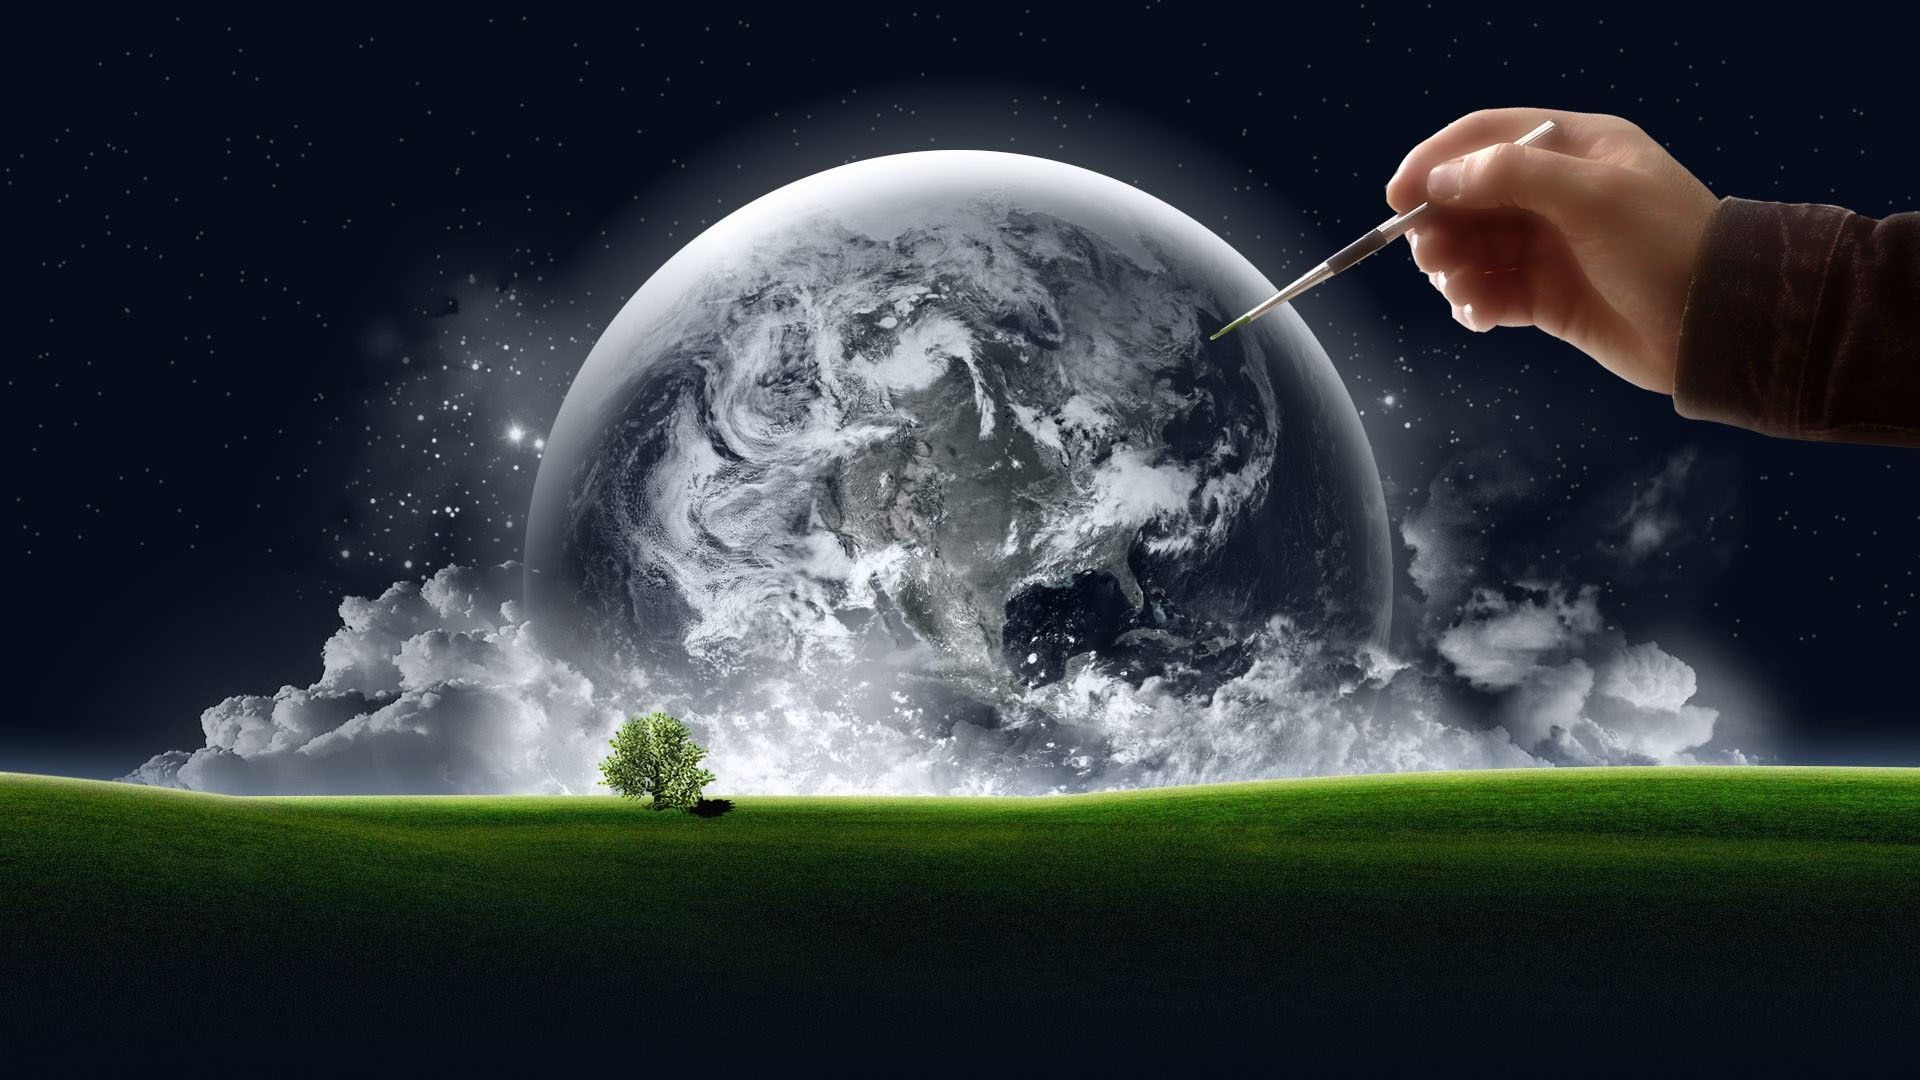 Clouds Trees Stars World Hands Grass Earth Artwork 1920x1080px Wallpaper Background #clouds Clip Art. Background picture, Amazing HD wallpaper, Full moon image